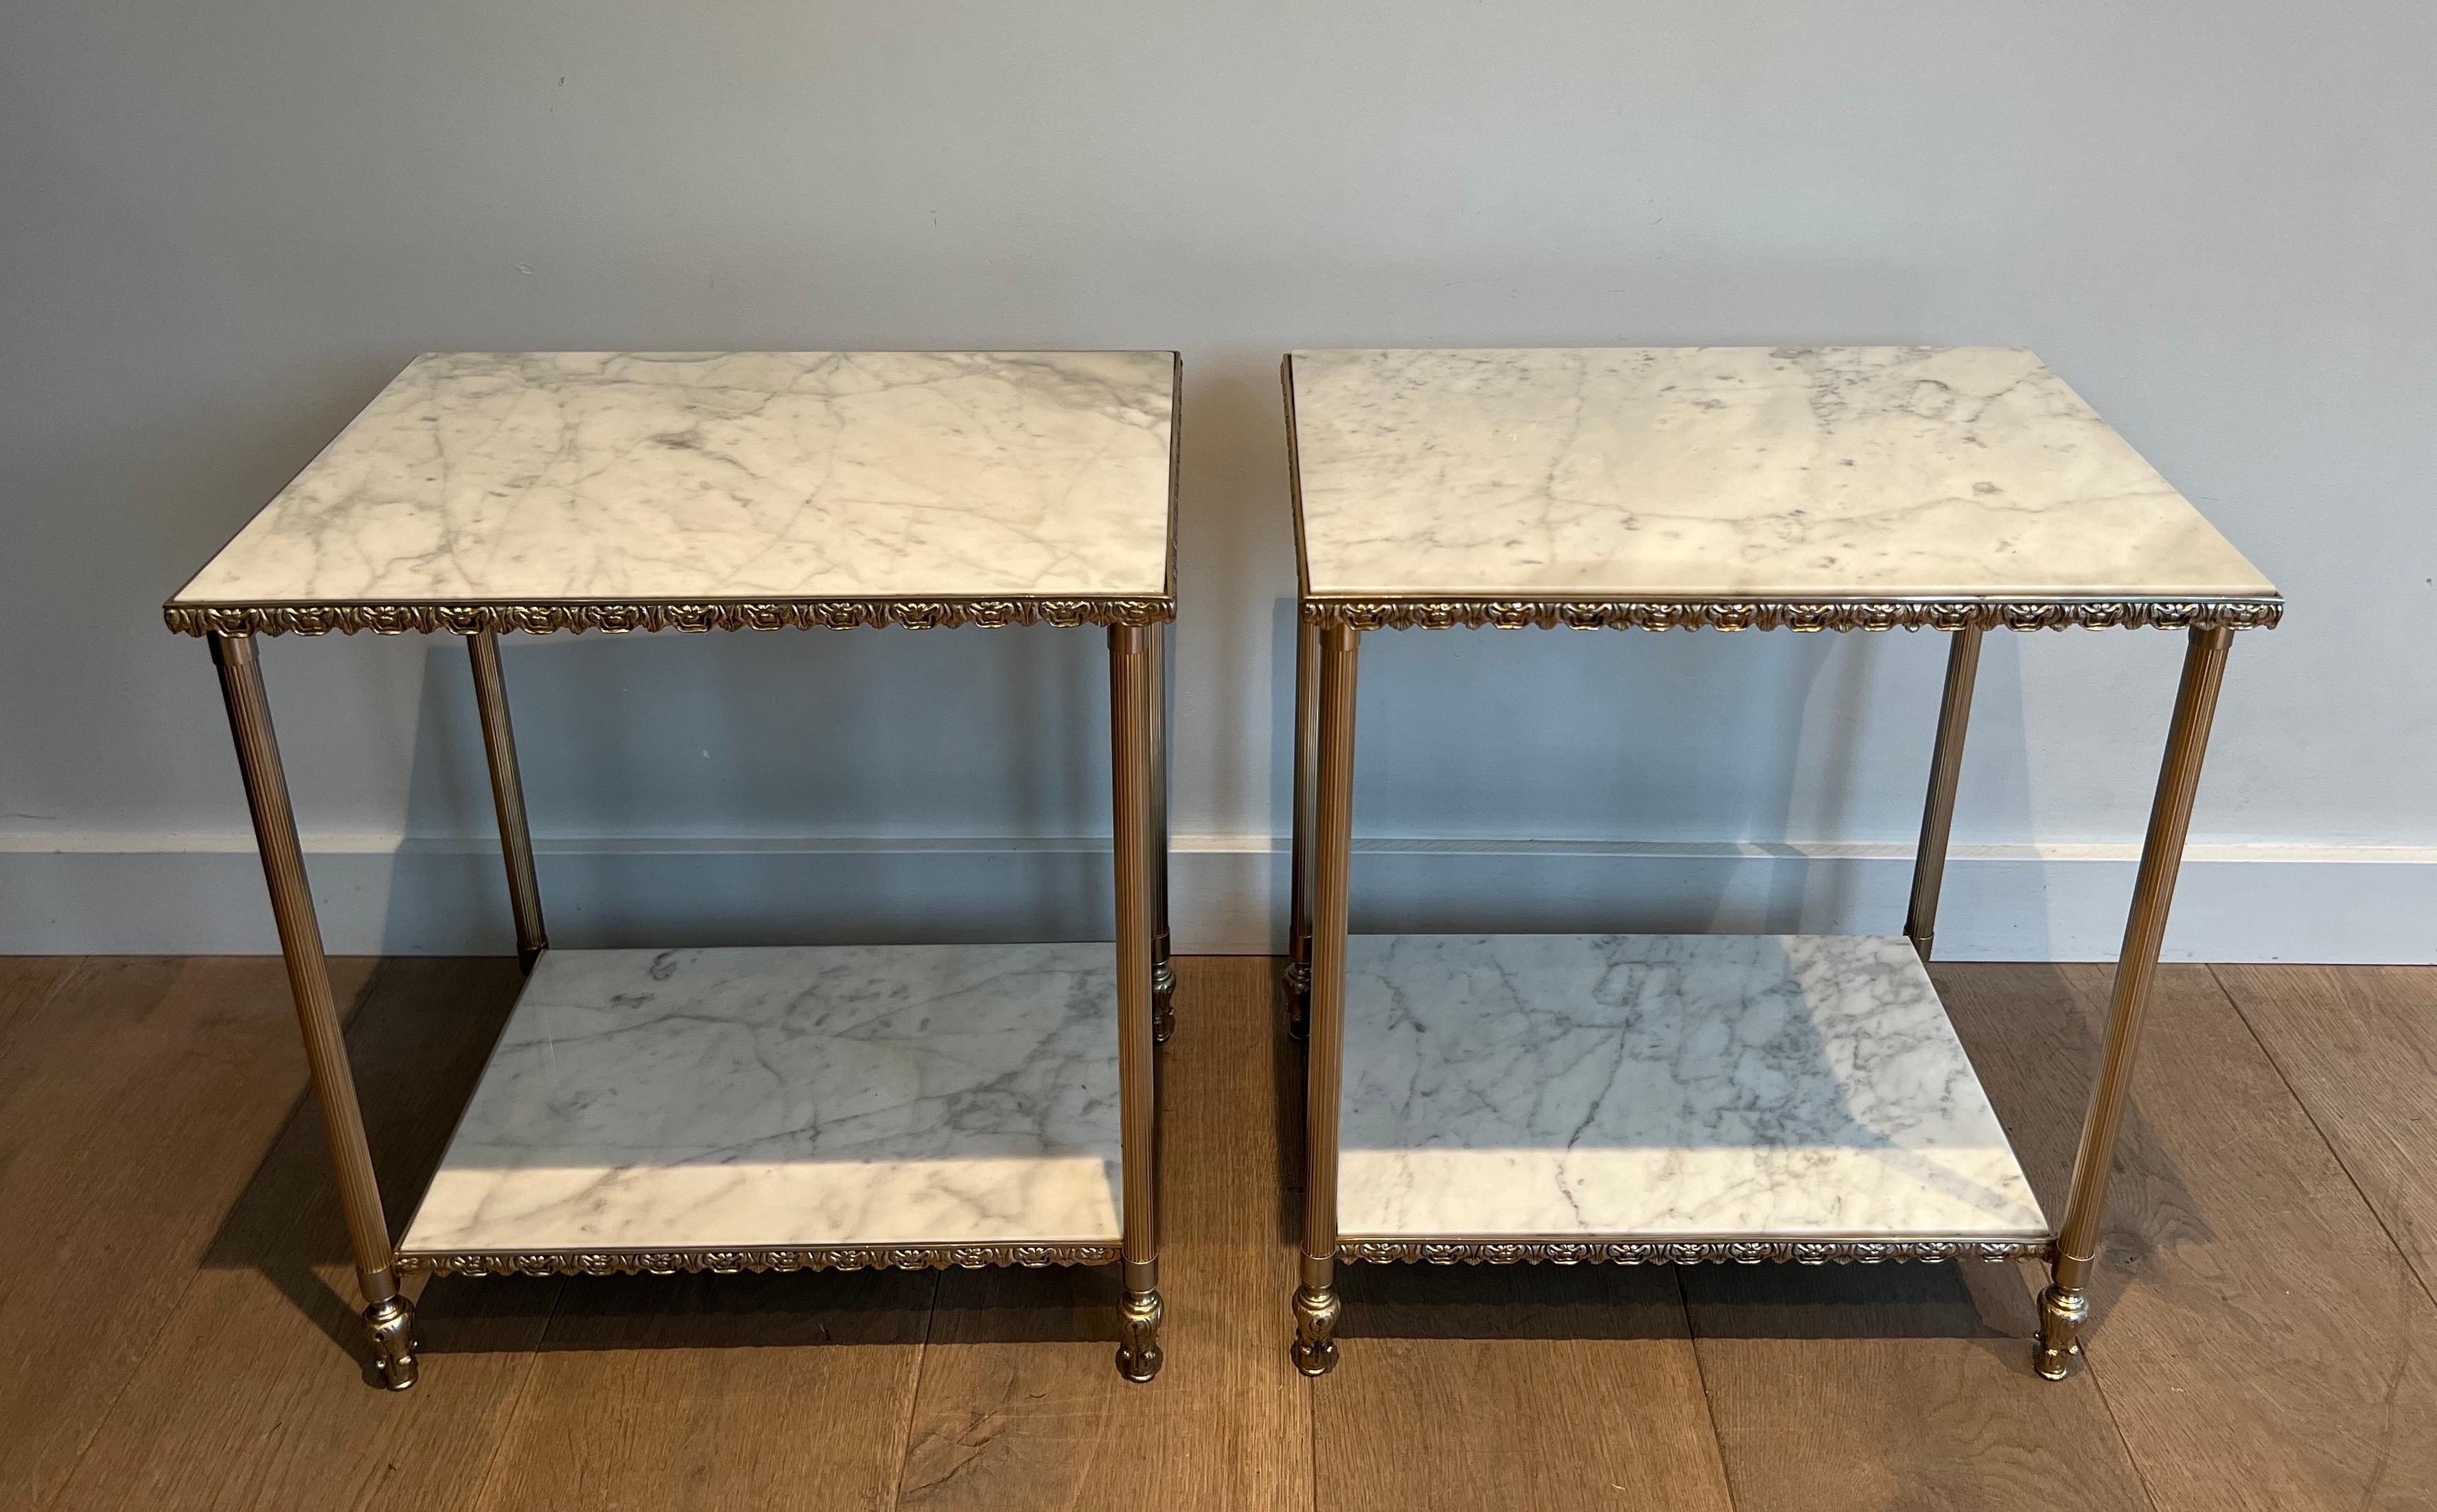 This very nice and unusual pair of side tables is made of silvered metal with Carrara marble tops. This is a French work in the style of Maison Jansen. Circa 1940